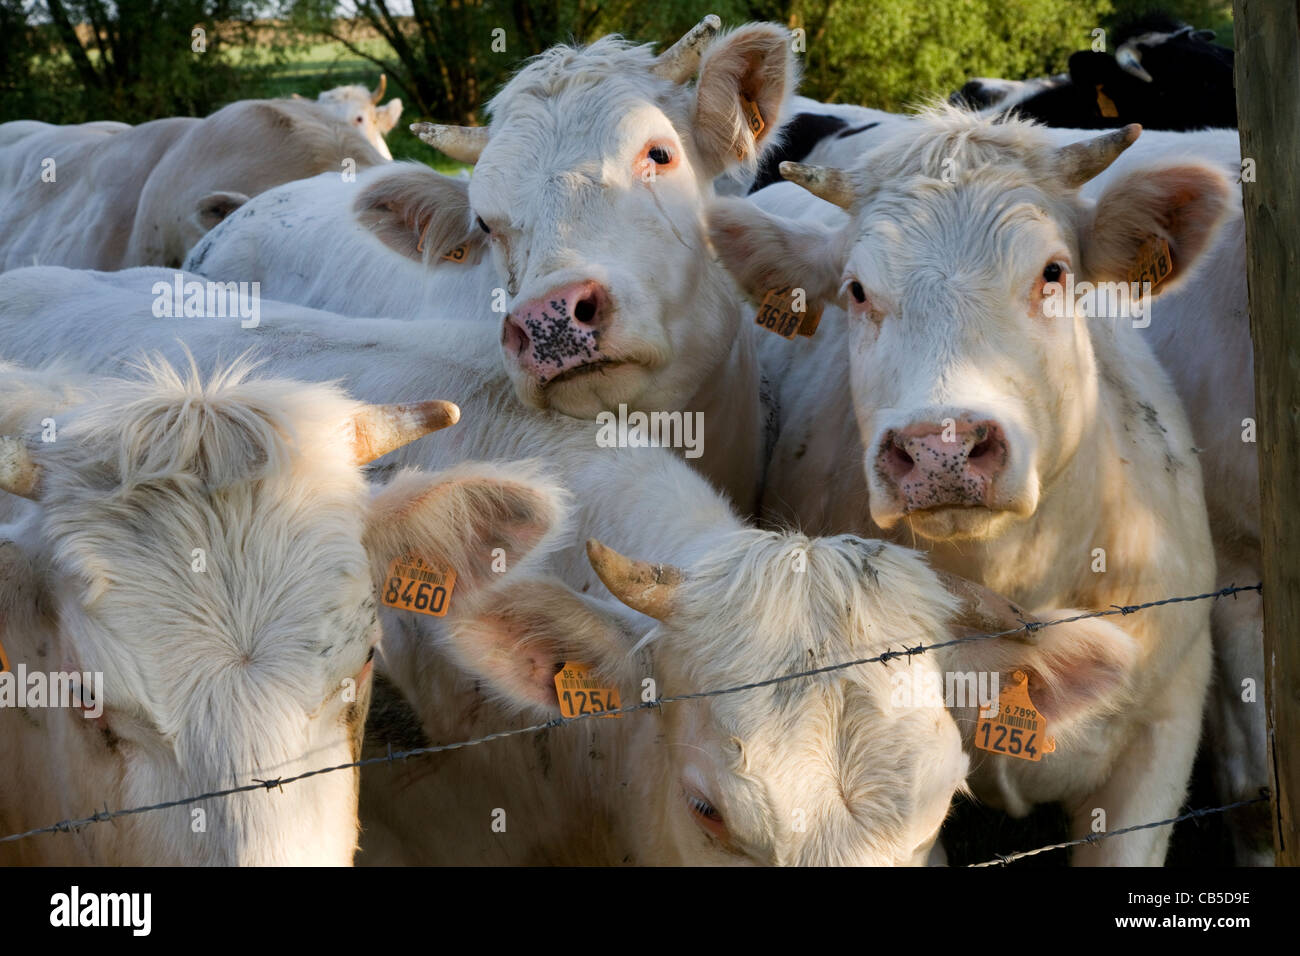 Herd of white cows (Bos taurus) with plastic ear tags in field, Belgium Stock Photo